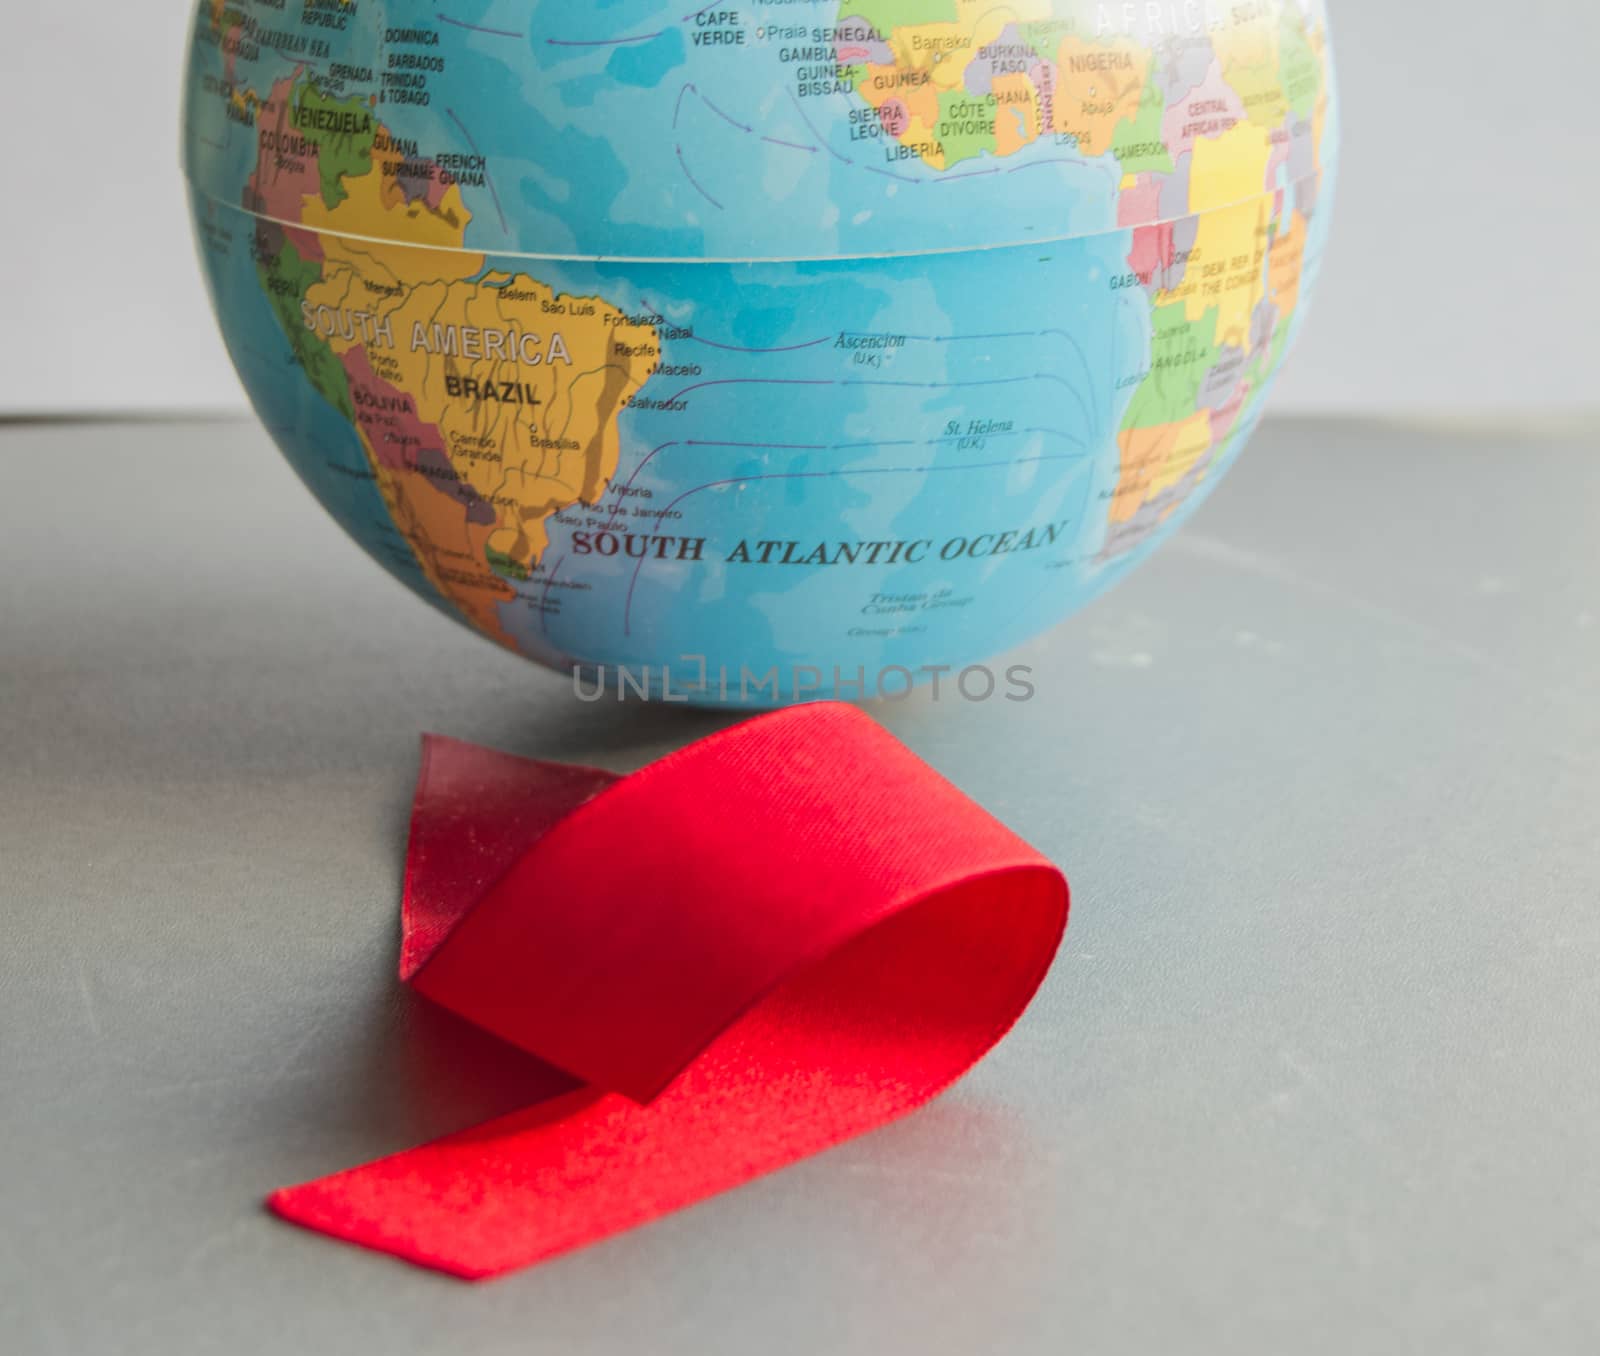 World AIDS day 1 December, close-up of world globe with red ribbon by claire_lucia